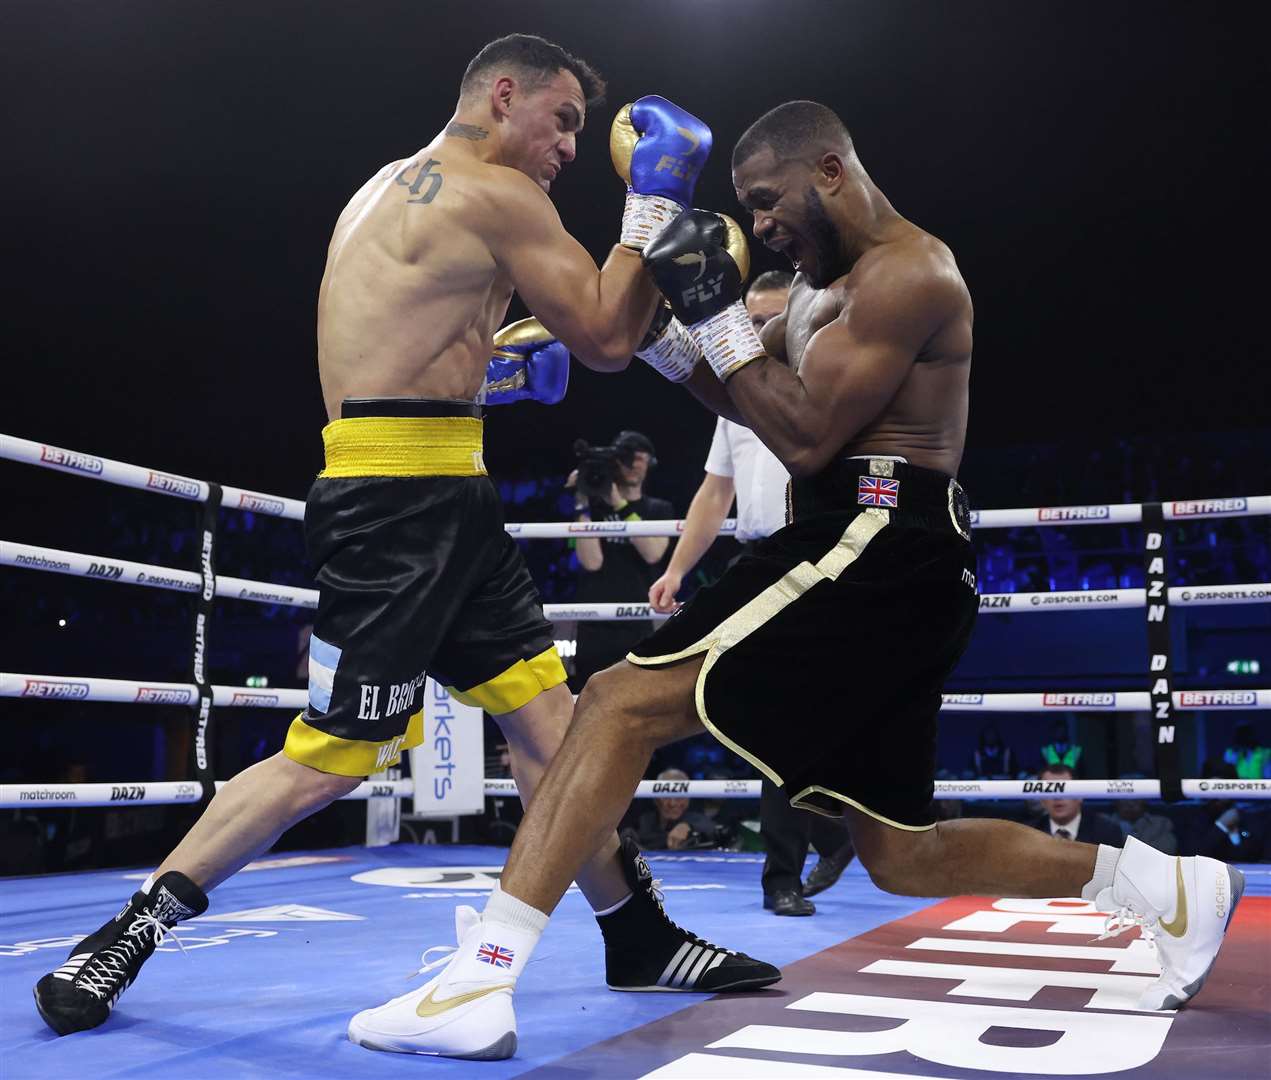 Cheavon Clarke on his way to victory against Gregorio Ulrich in November. Picture: Mark Robinson /Matchroom Boxing